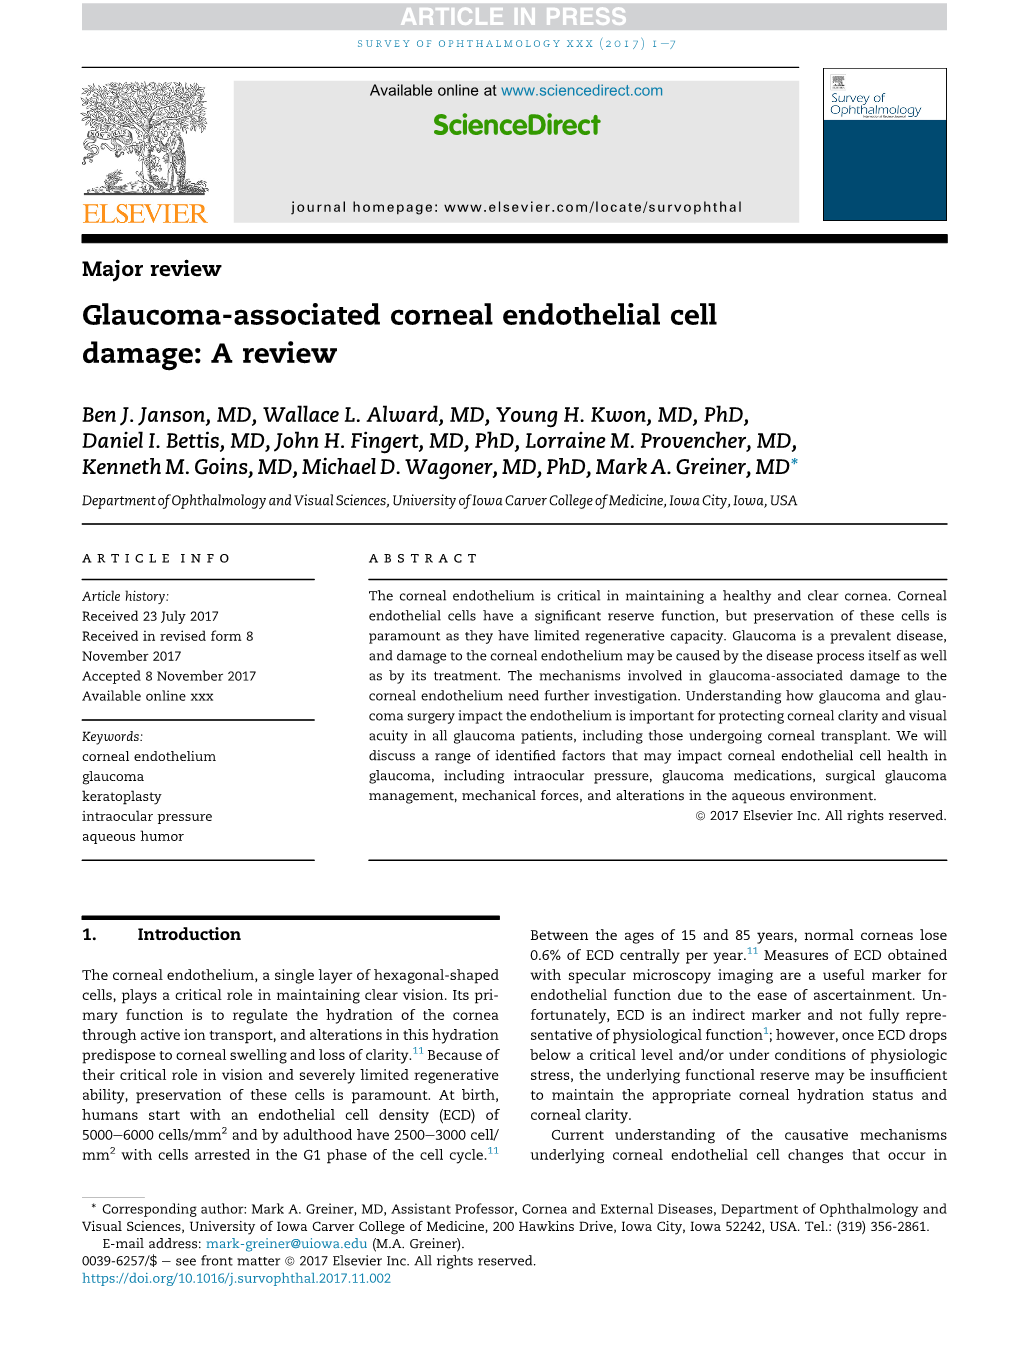 Glaucoma-Associated Corneal Endothelial Cell Damage: a Review